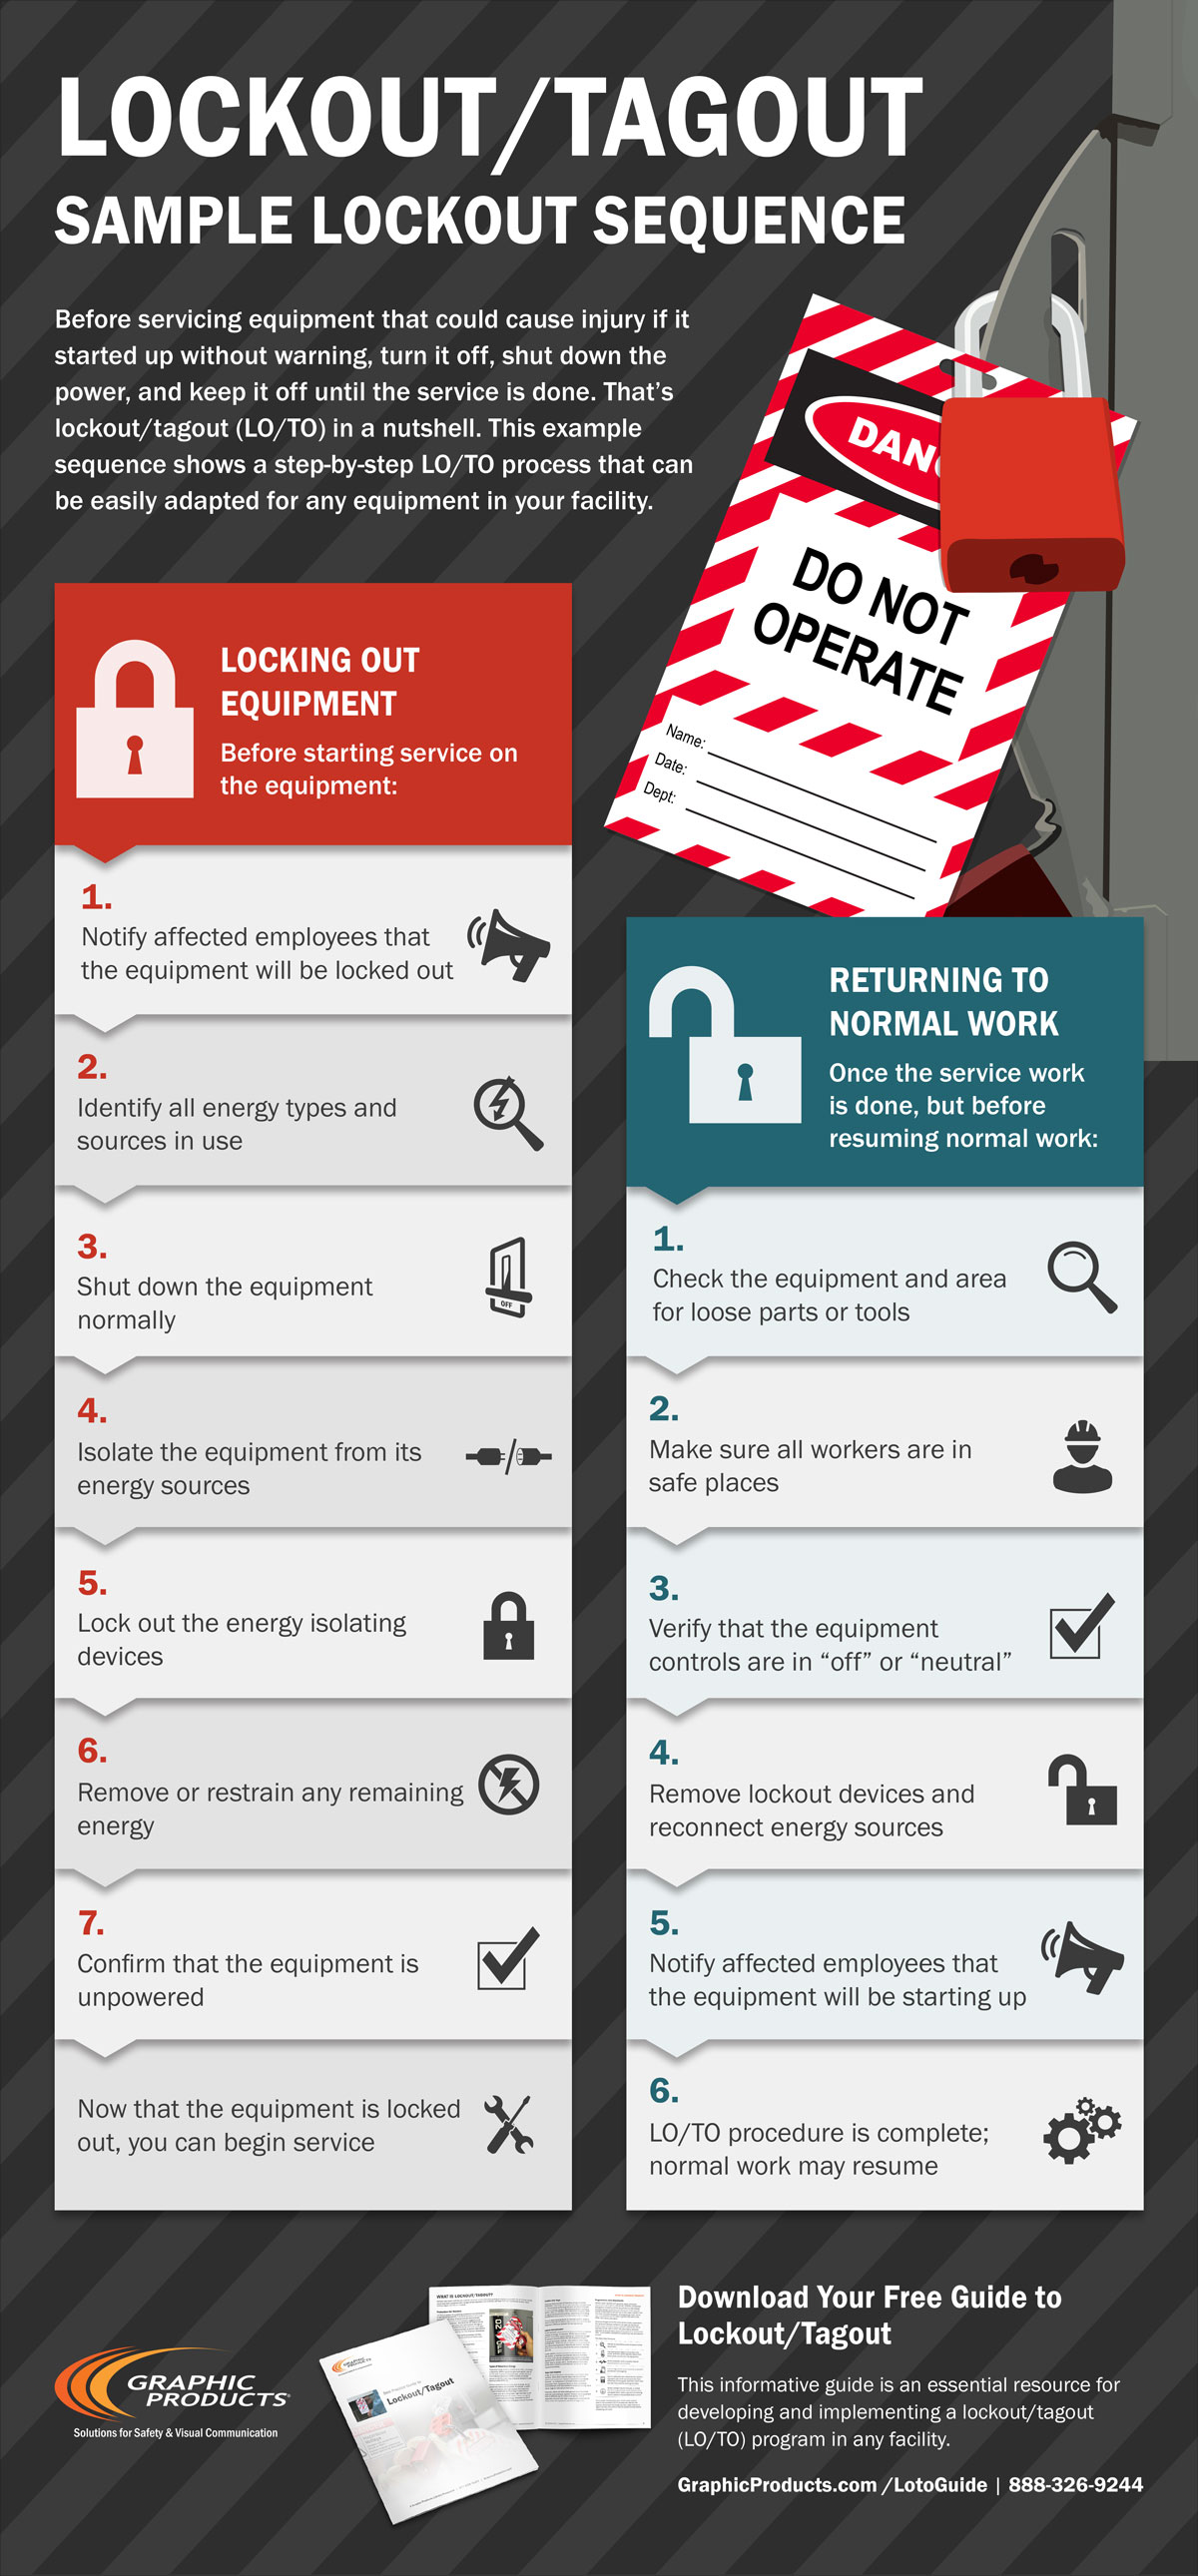 Infographic: Sample Lockout Tagout Sequence DuraLabel